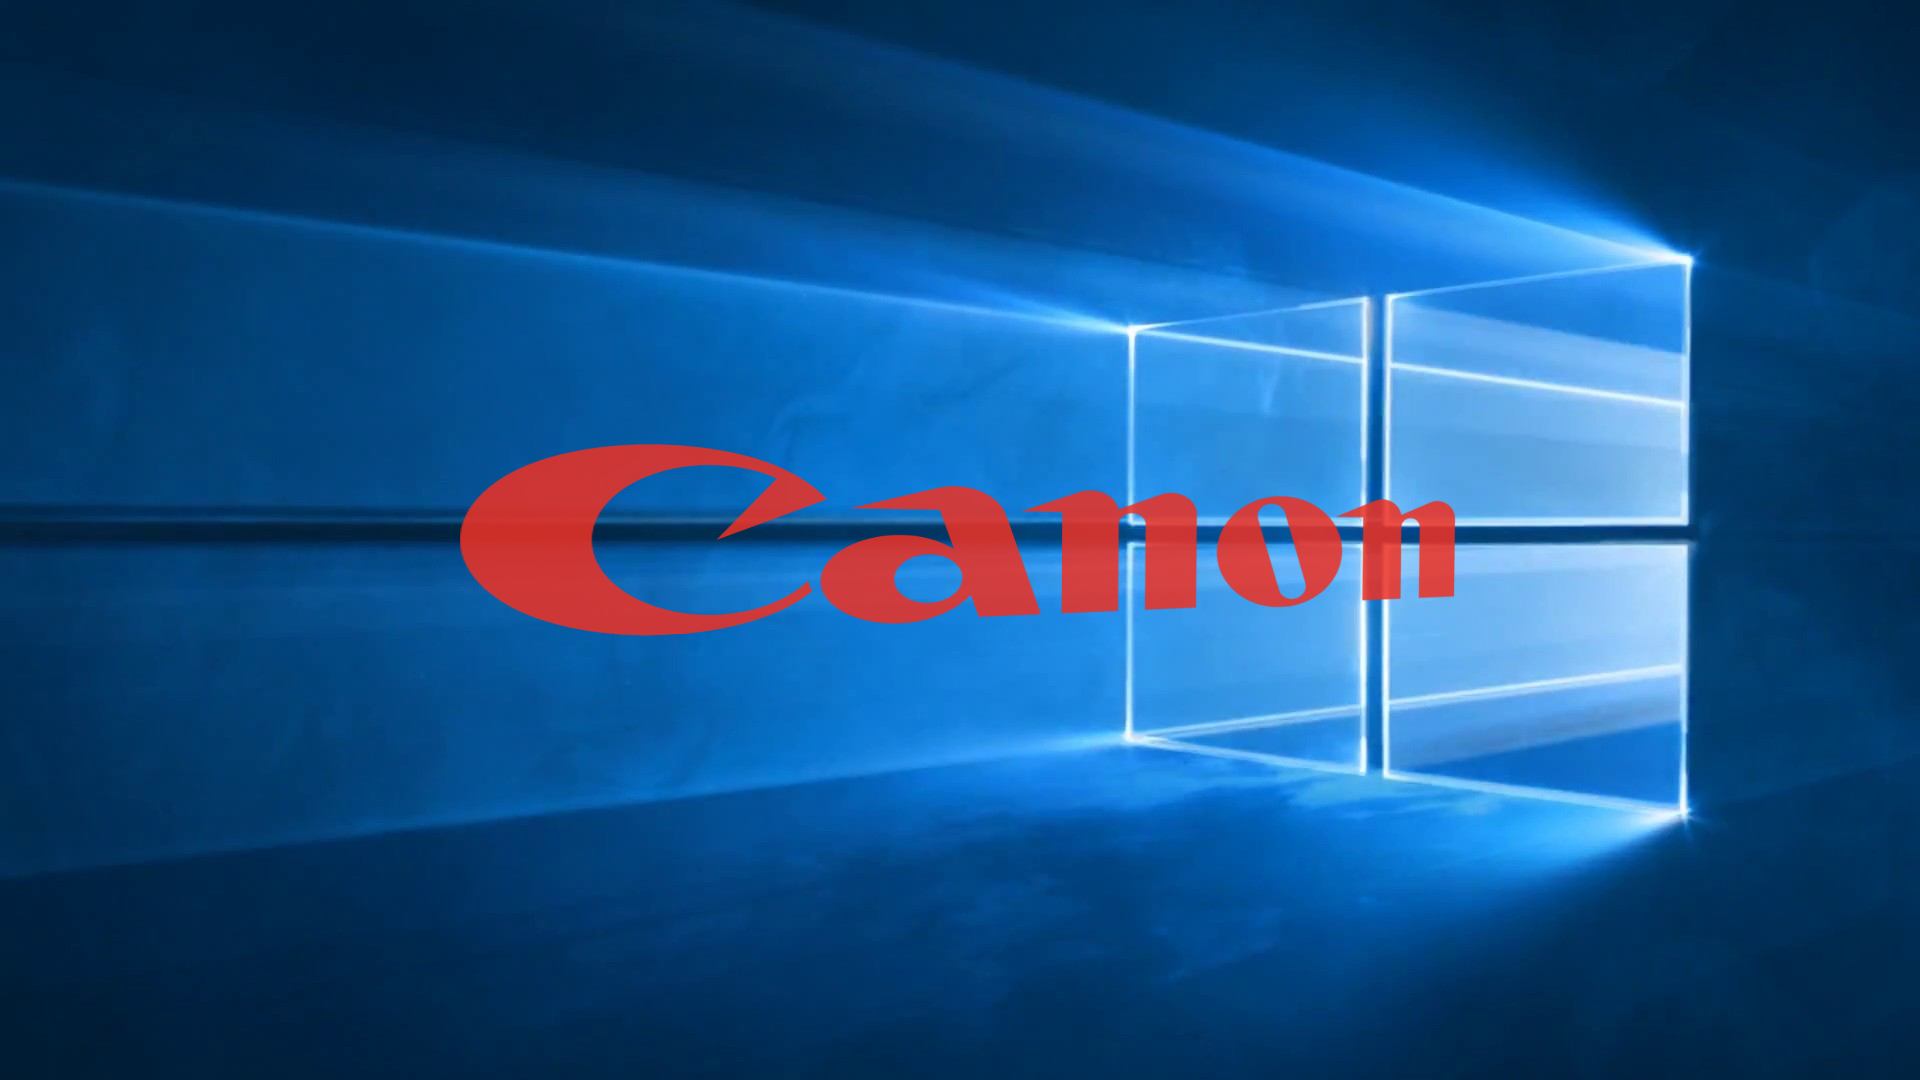 Install Canon i-SENSYS MF628Cw Printer Driver on Windows 10 - Featured